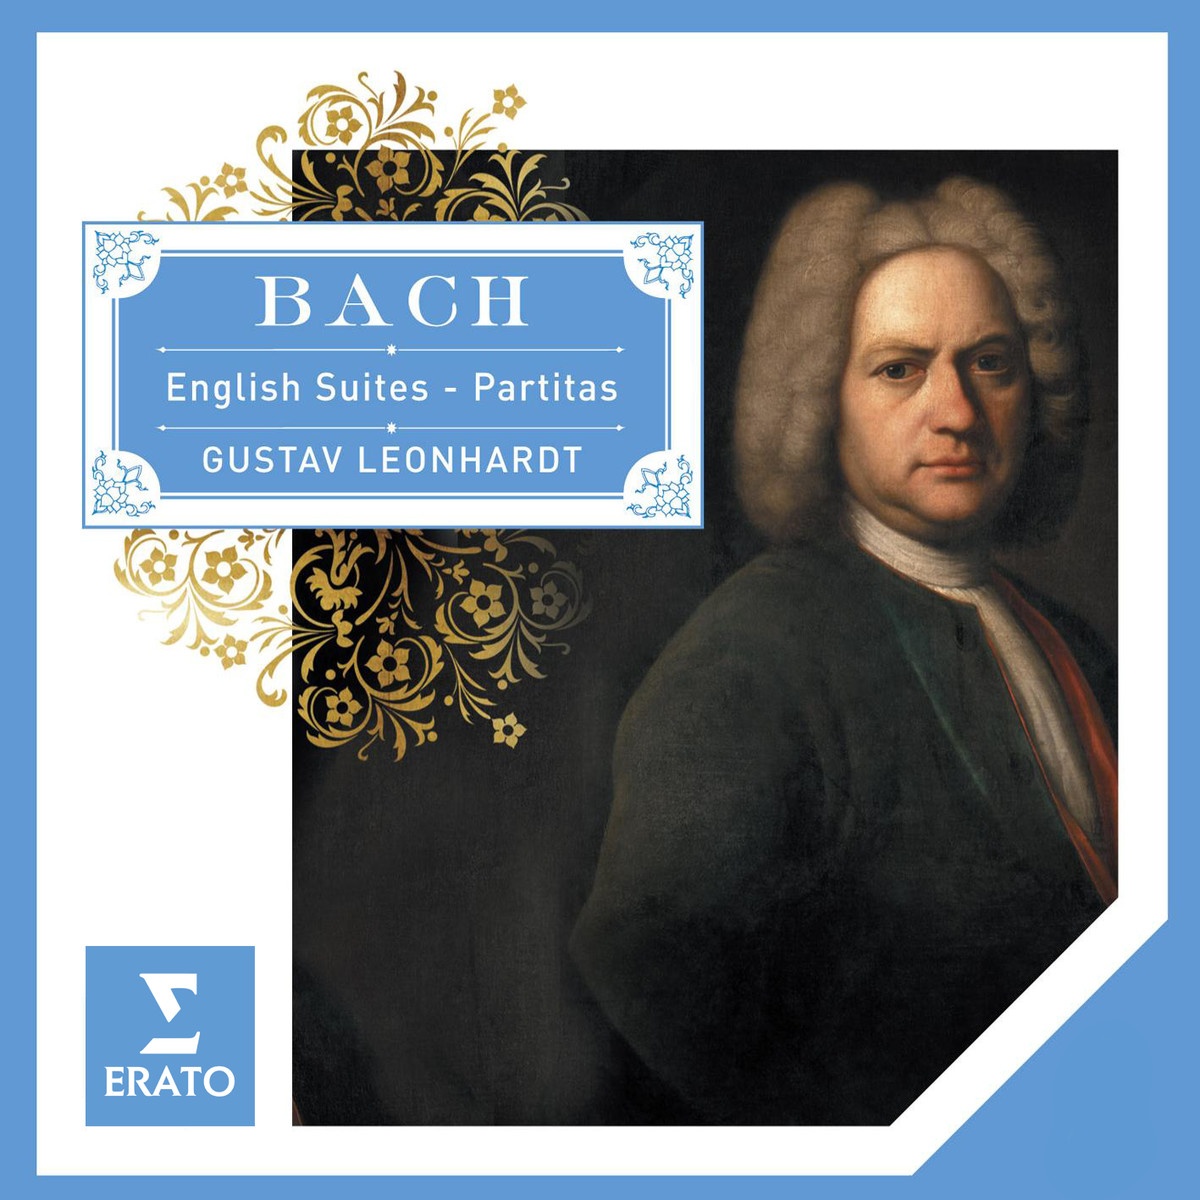 6 English Suites BWV806-811, No. 4 in F BWV809: Courante